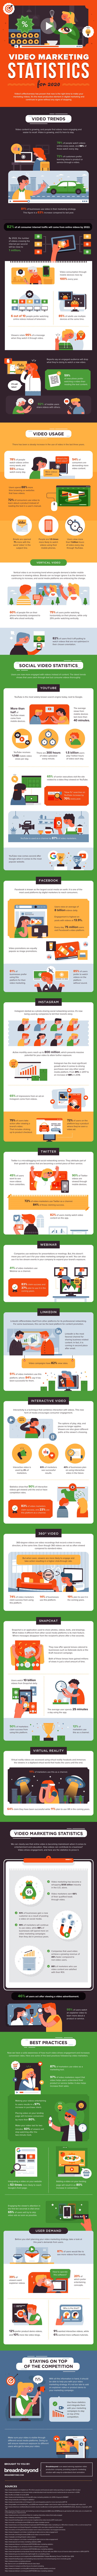 Video Marketing Statistics that’s Going to Rock 2020 [INFOGRAPHIC]